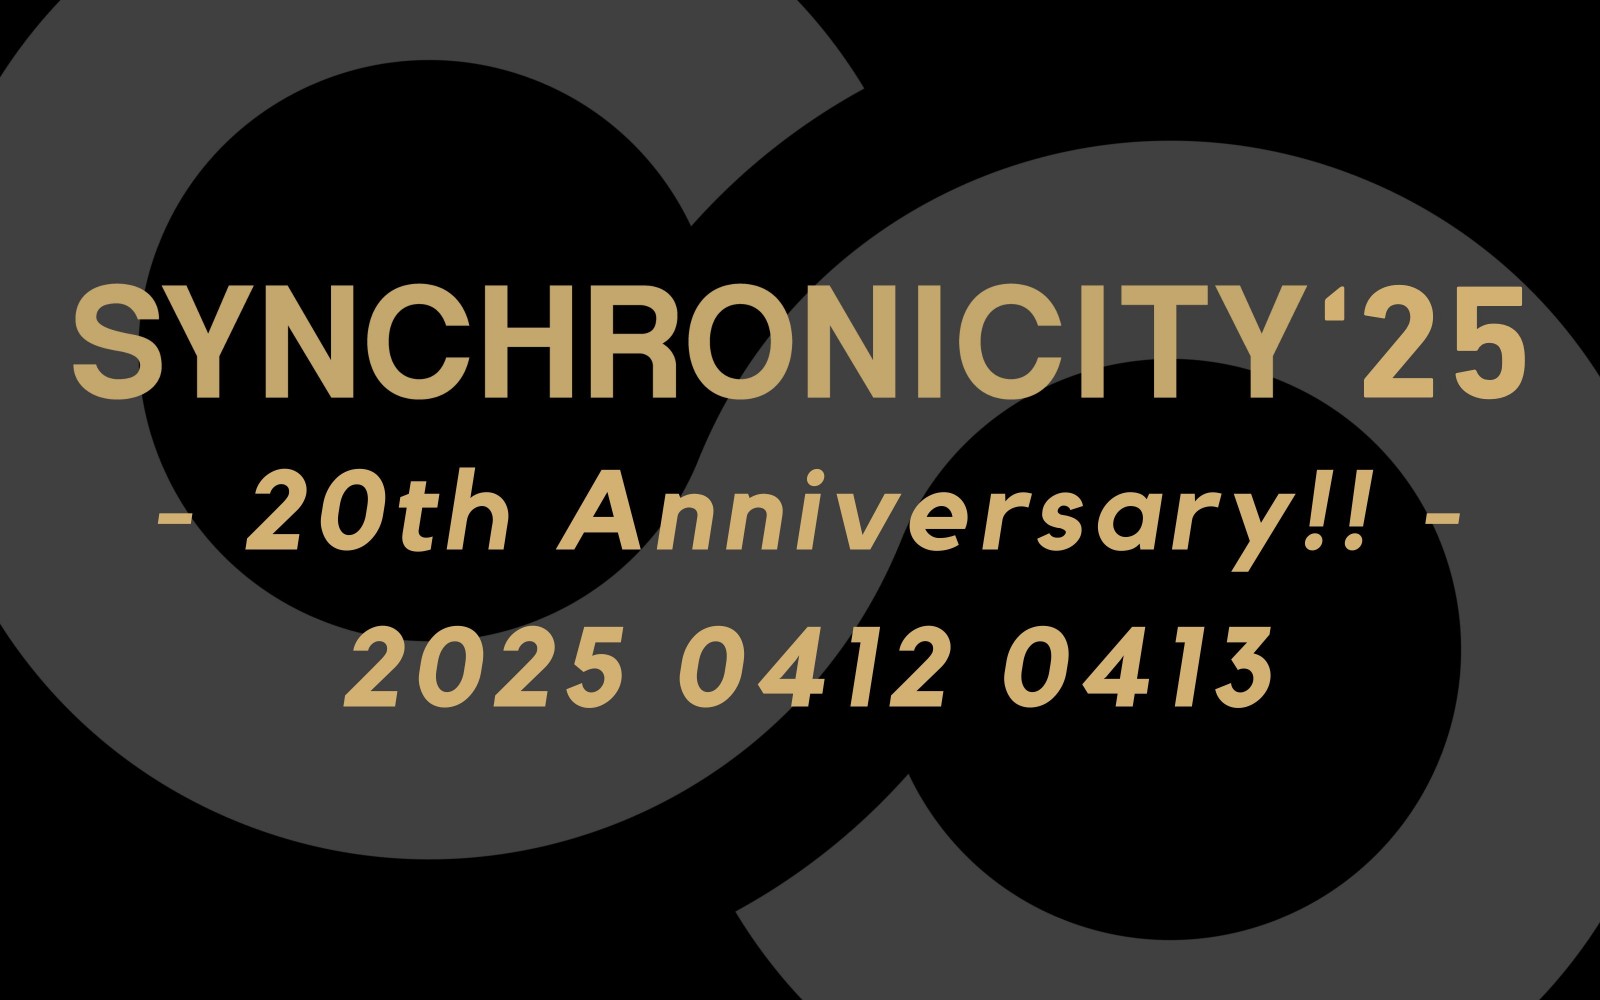 SYNCHRONICITY'25 Top Banner